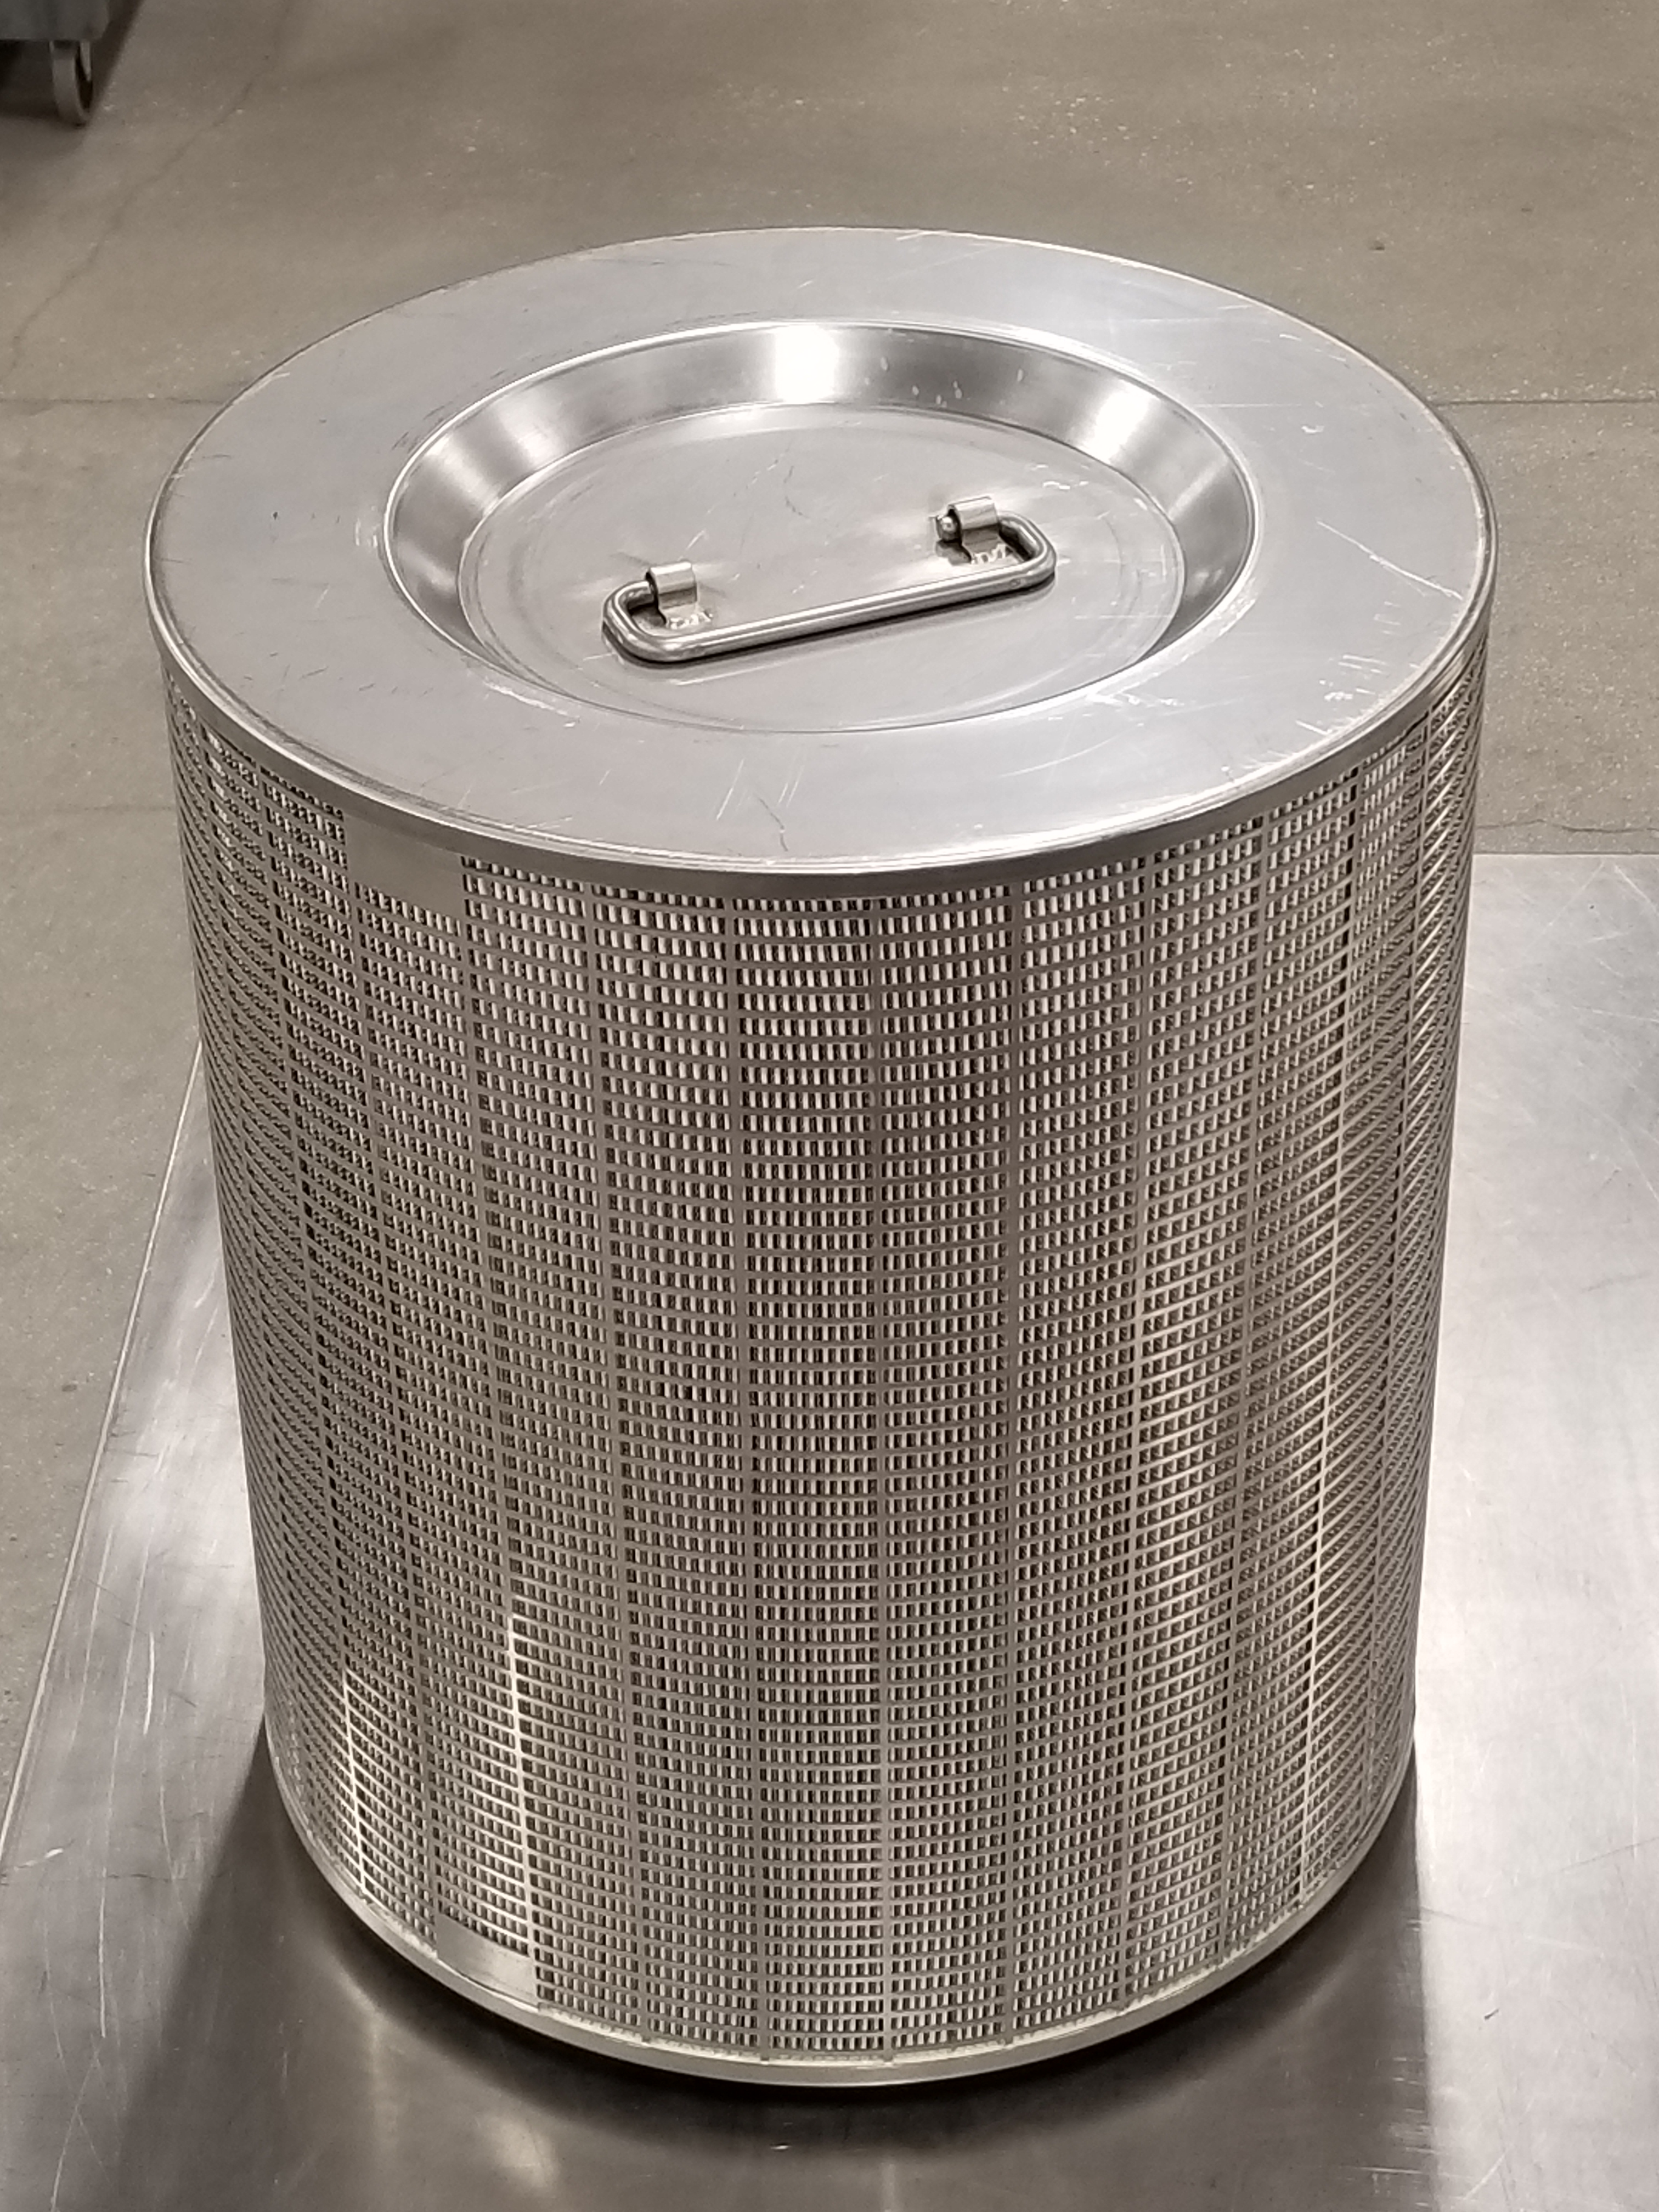 The high-strength radial flow HEPA filter developed by Porvair Filtration Group.